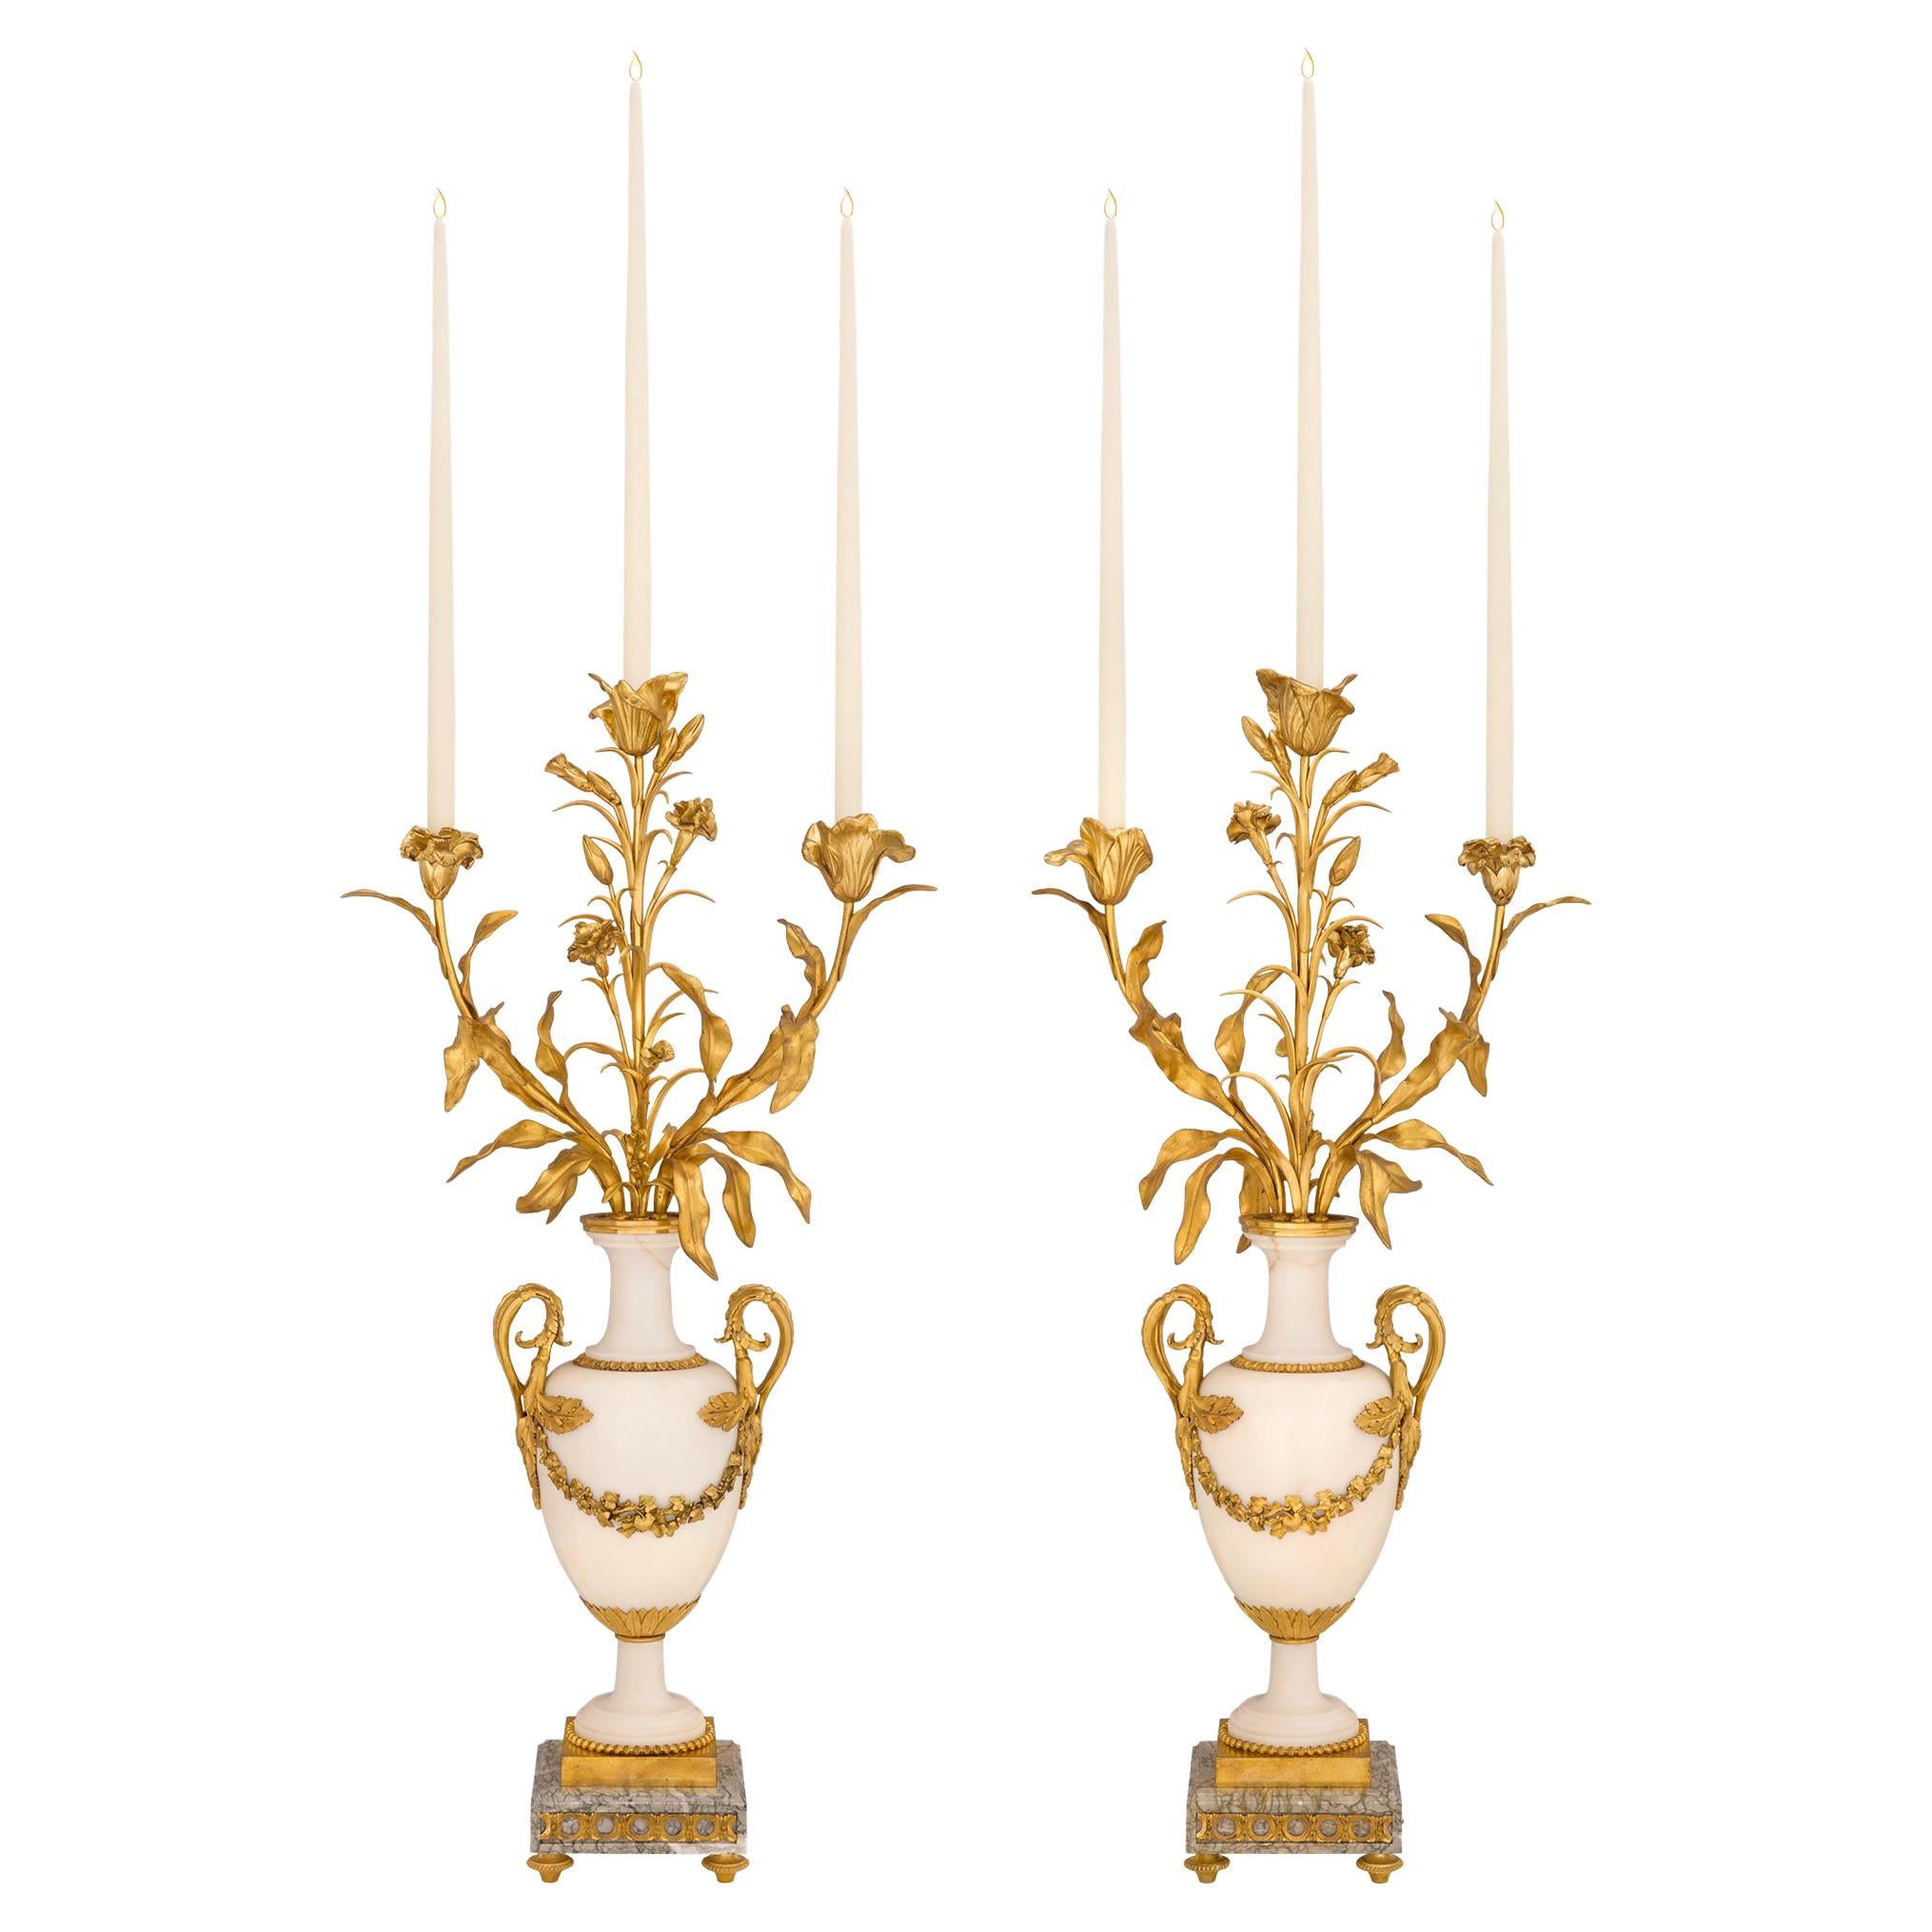 Pair of French 19th Century Louis XVI Style Marble and Ormolu Candelabras